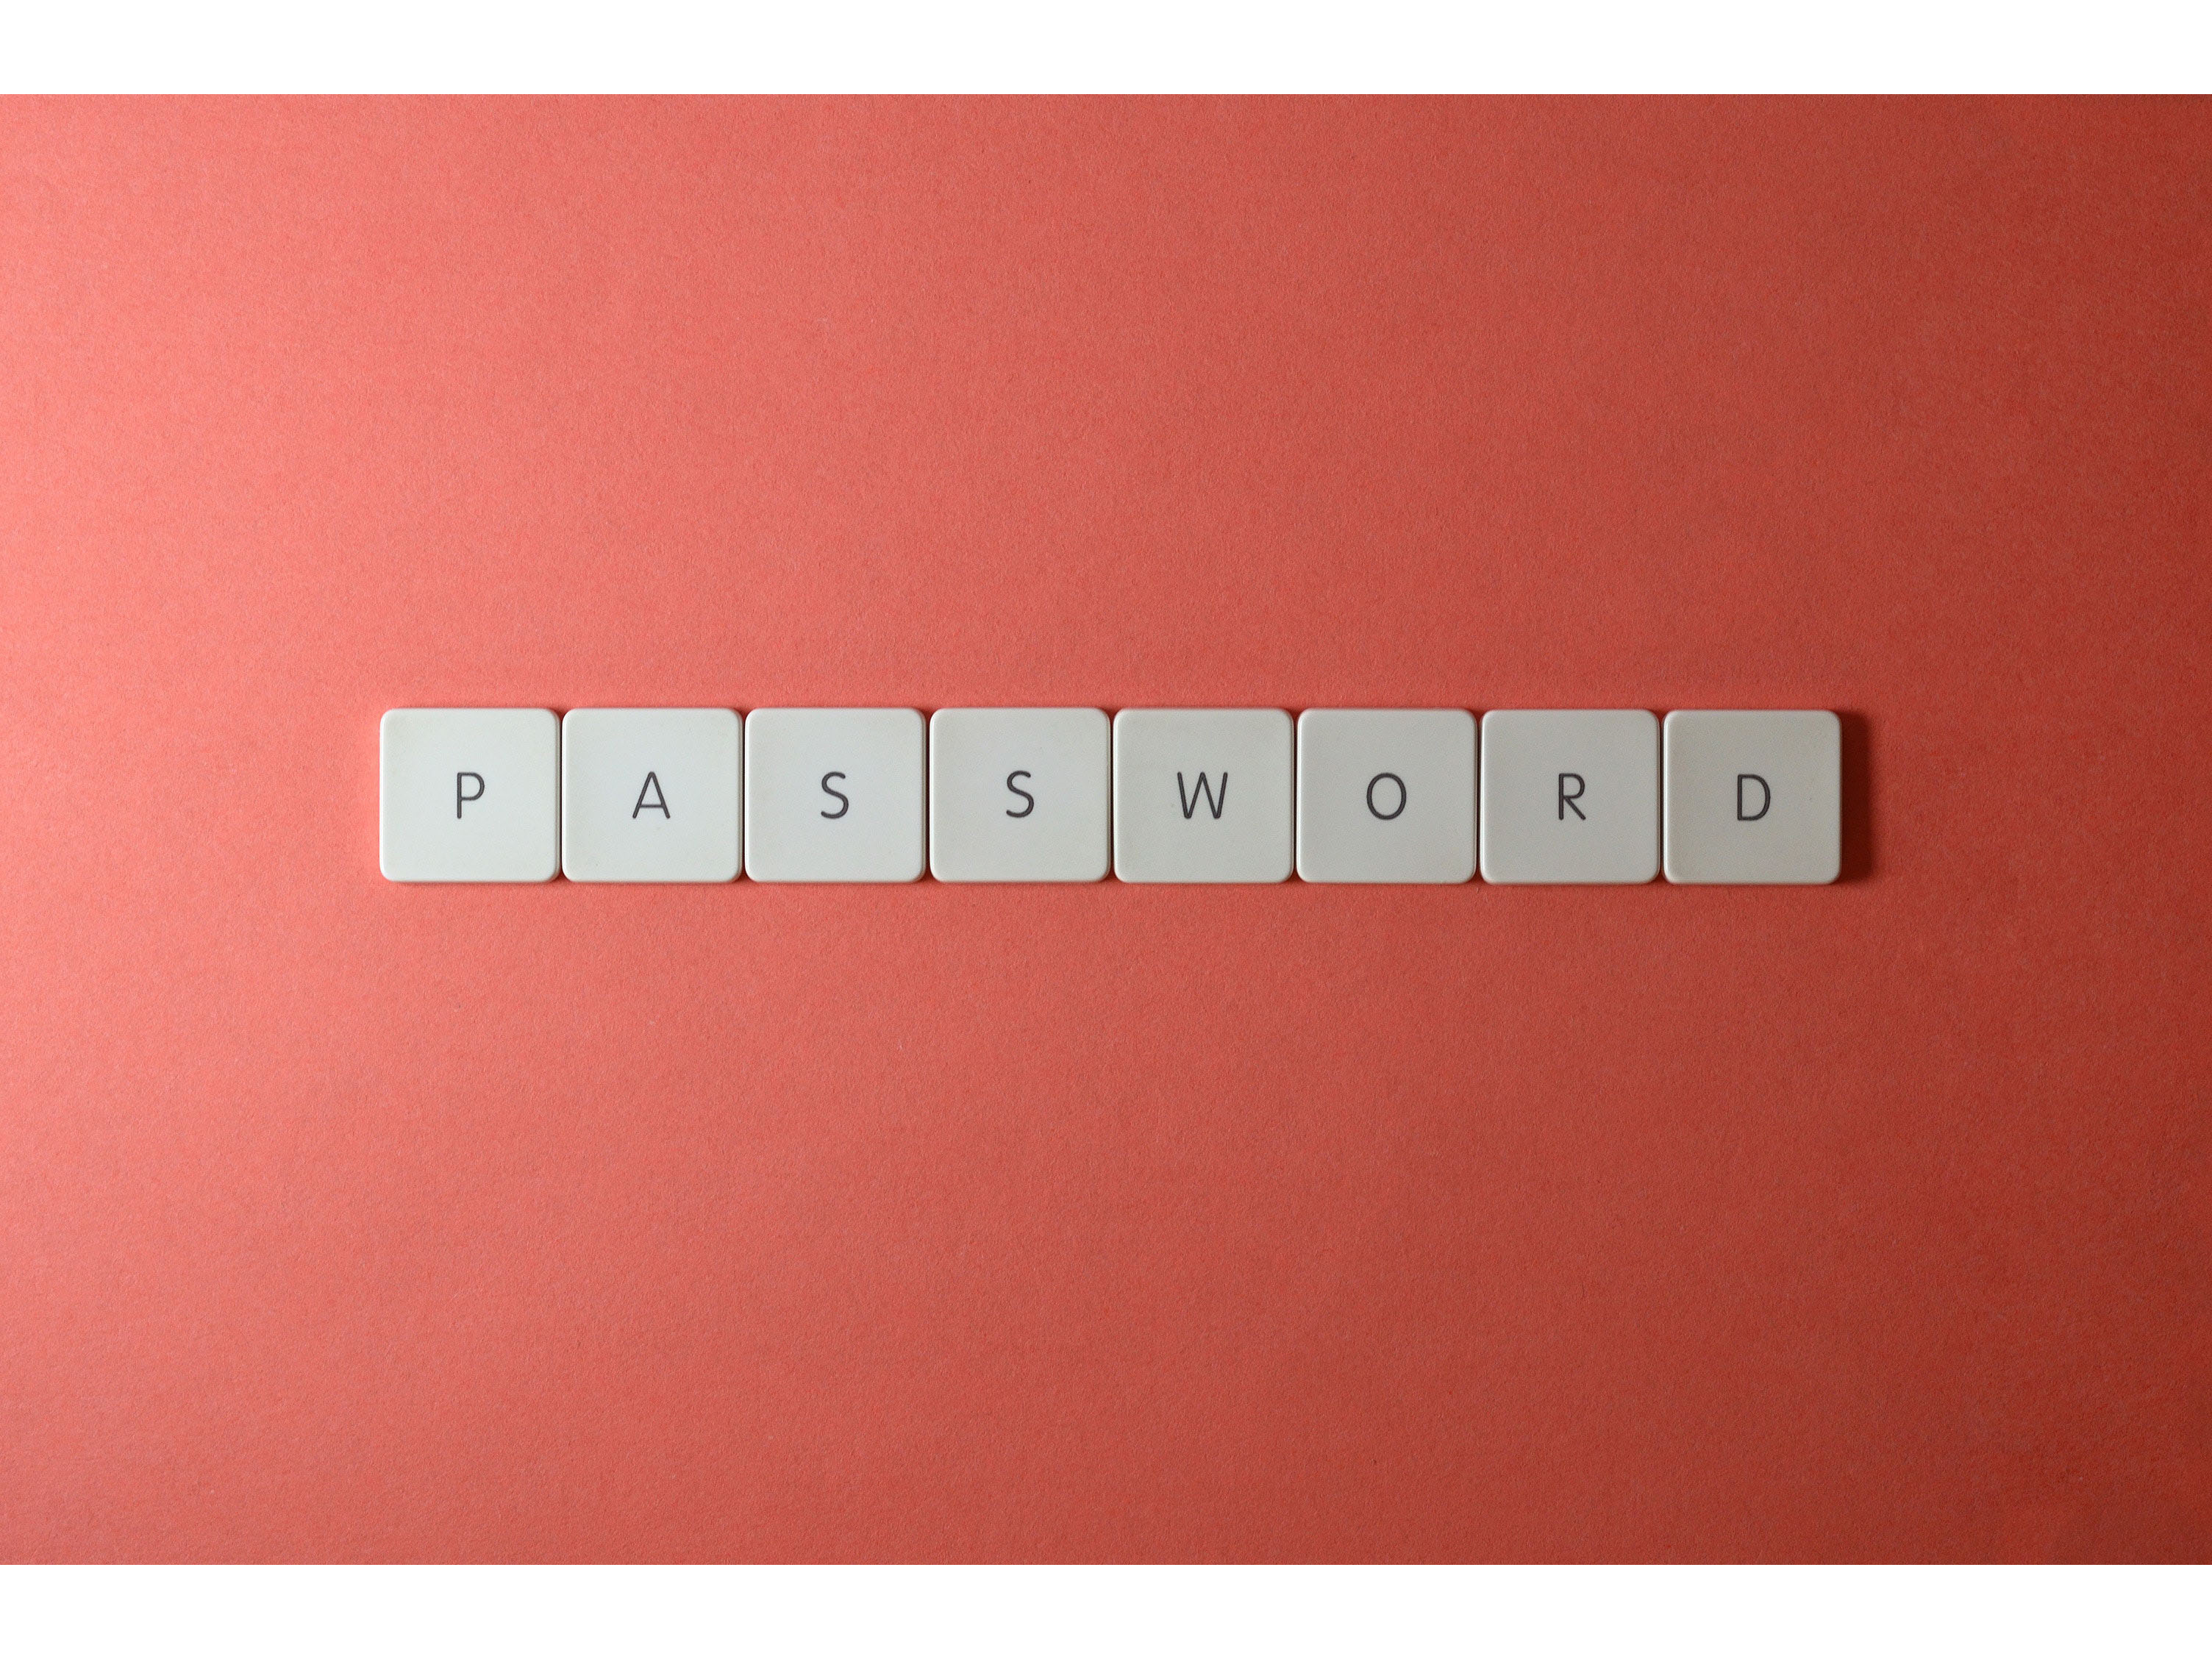 Media and marketing industry among most breached: what does that say about your boss’s passwords?